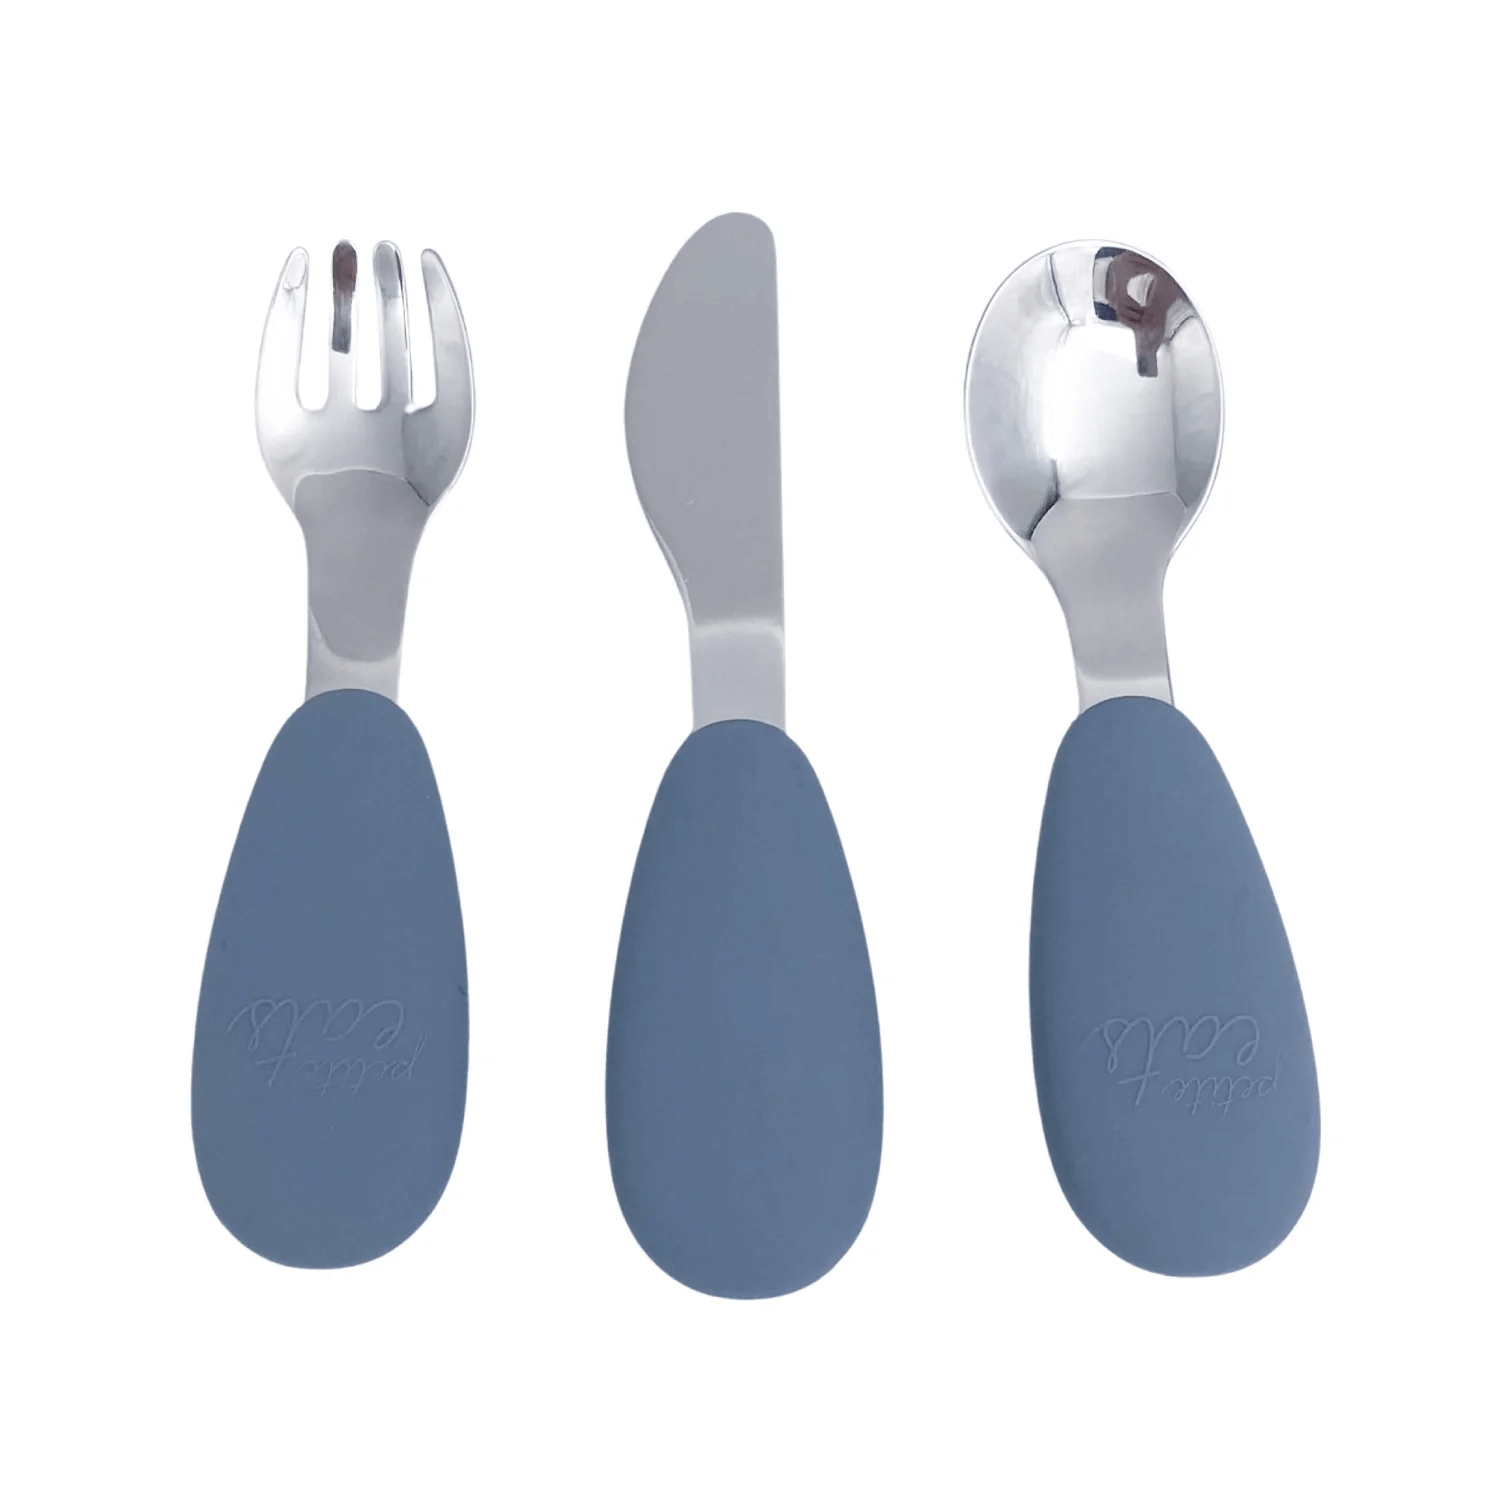 Petite Eats Full Metal Cutlery Set in Pewter available at Bear & Moo